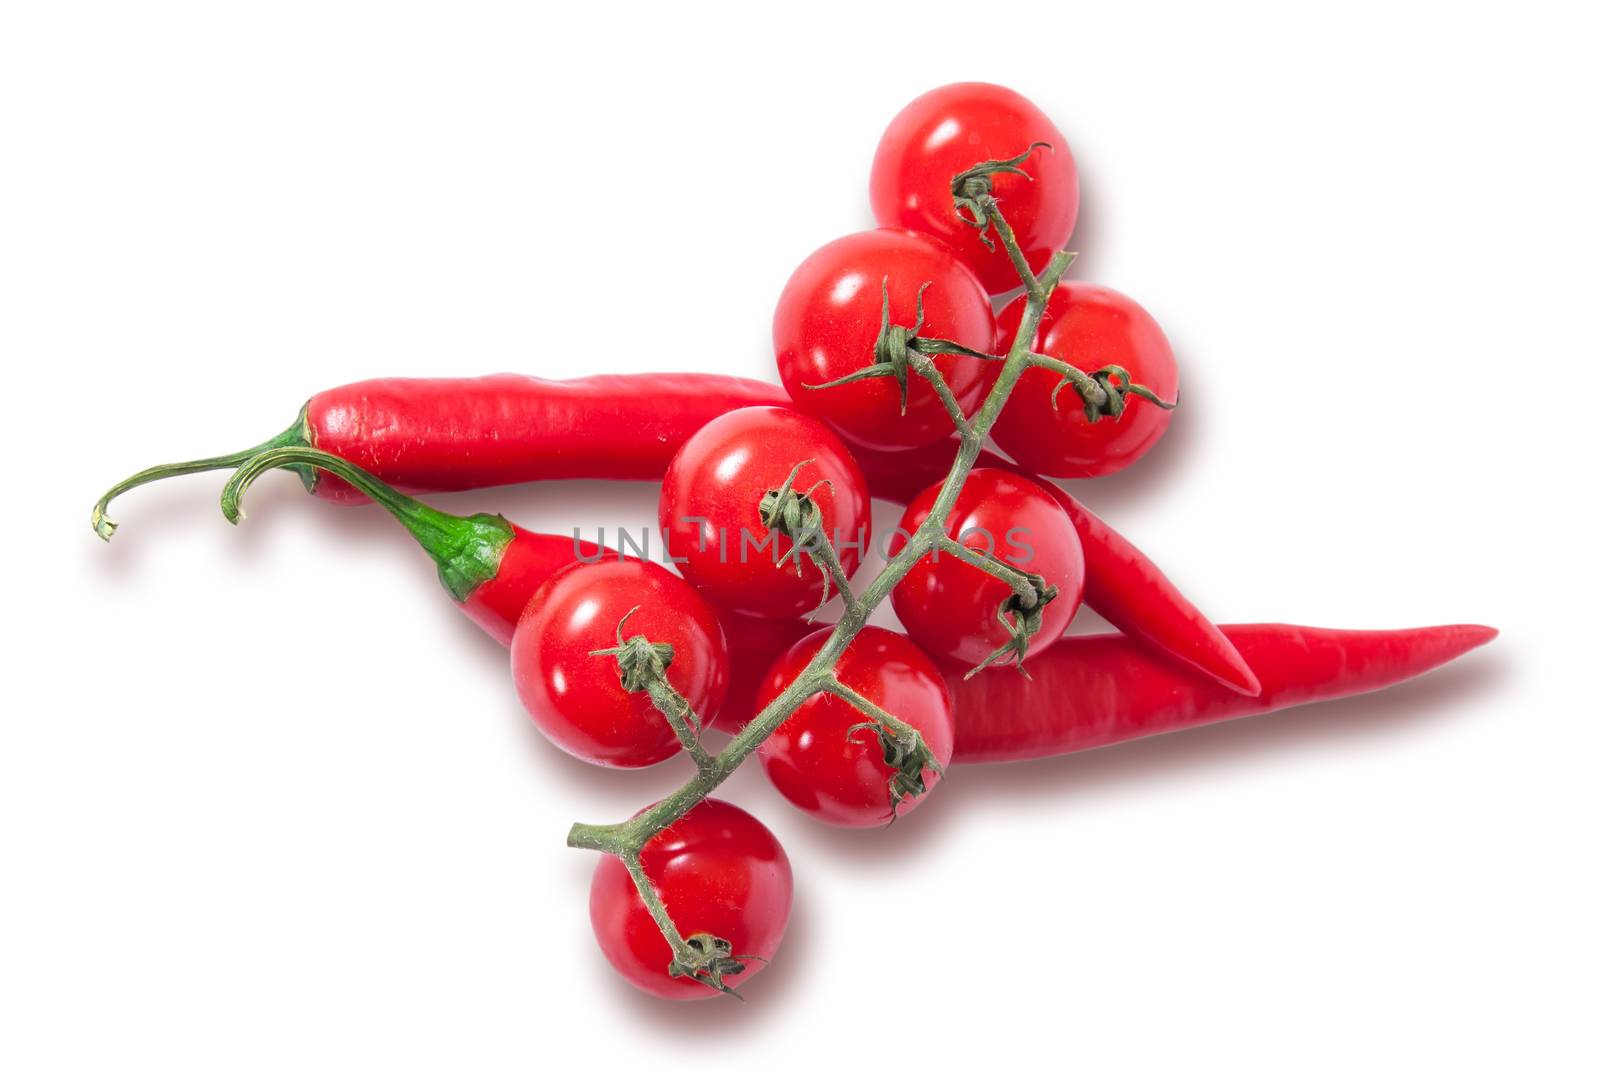 Branch of cherry tomatoes and two red chili peppers by Cipariss